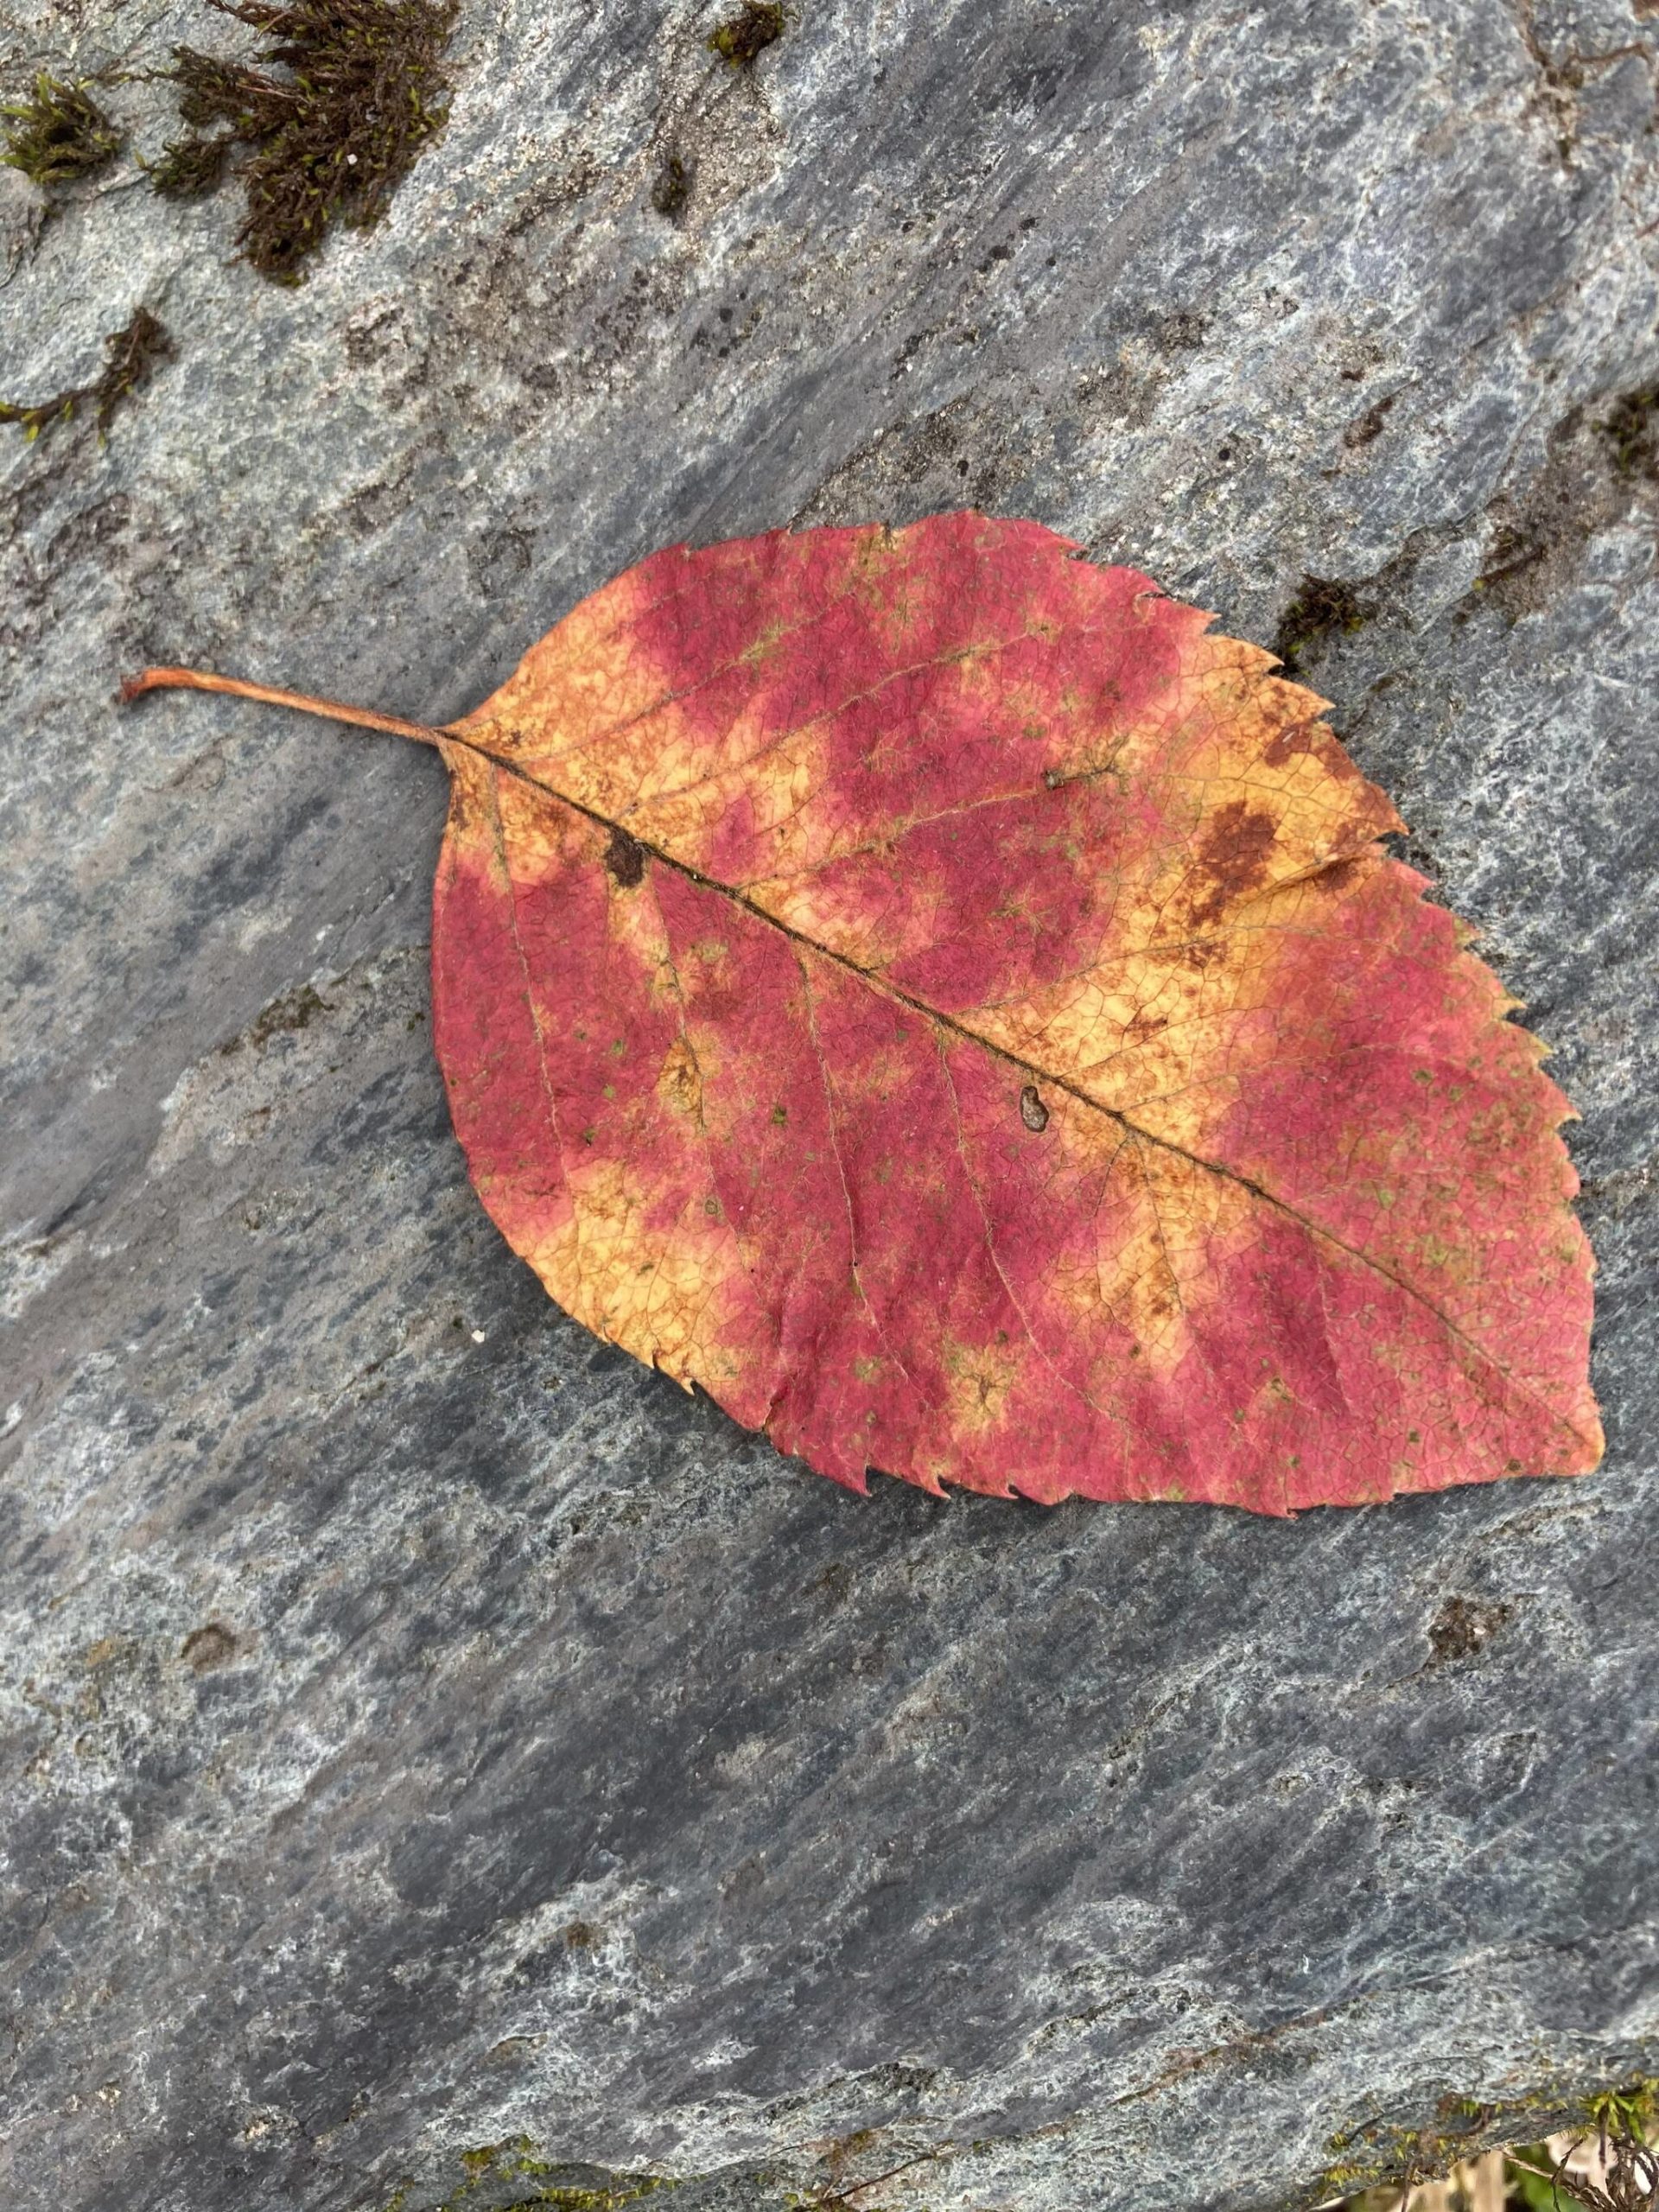 A single crabapple leaf offers varied bright colors. (Courtesy Photo / Mary F. Willson)